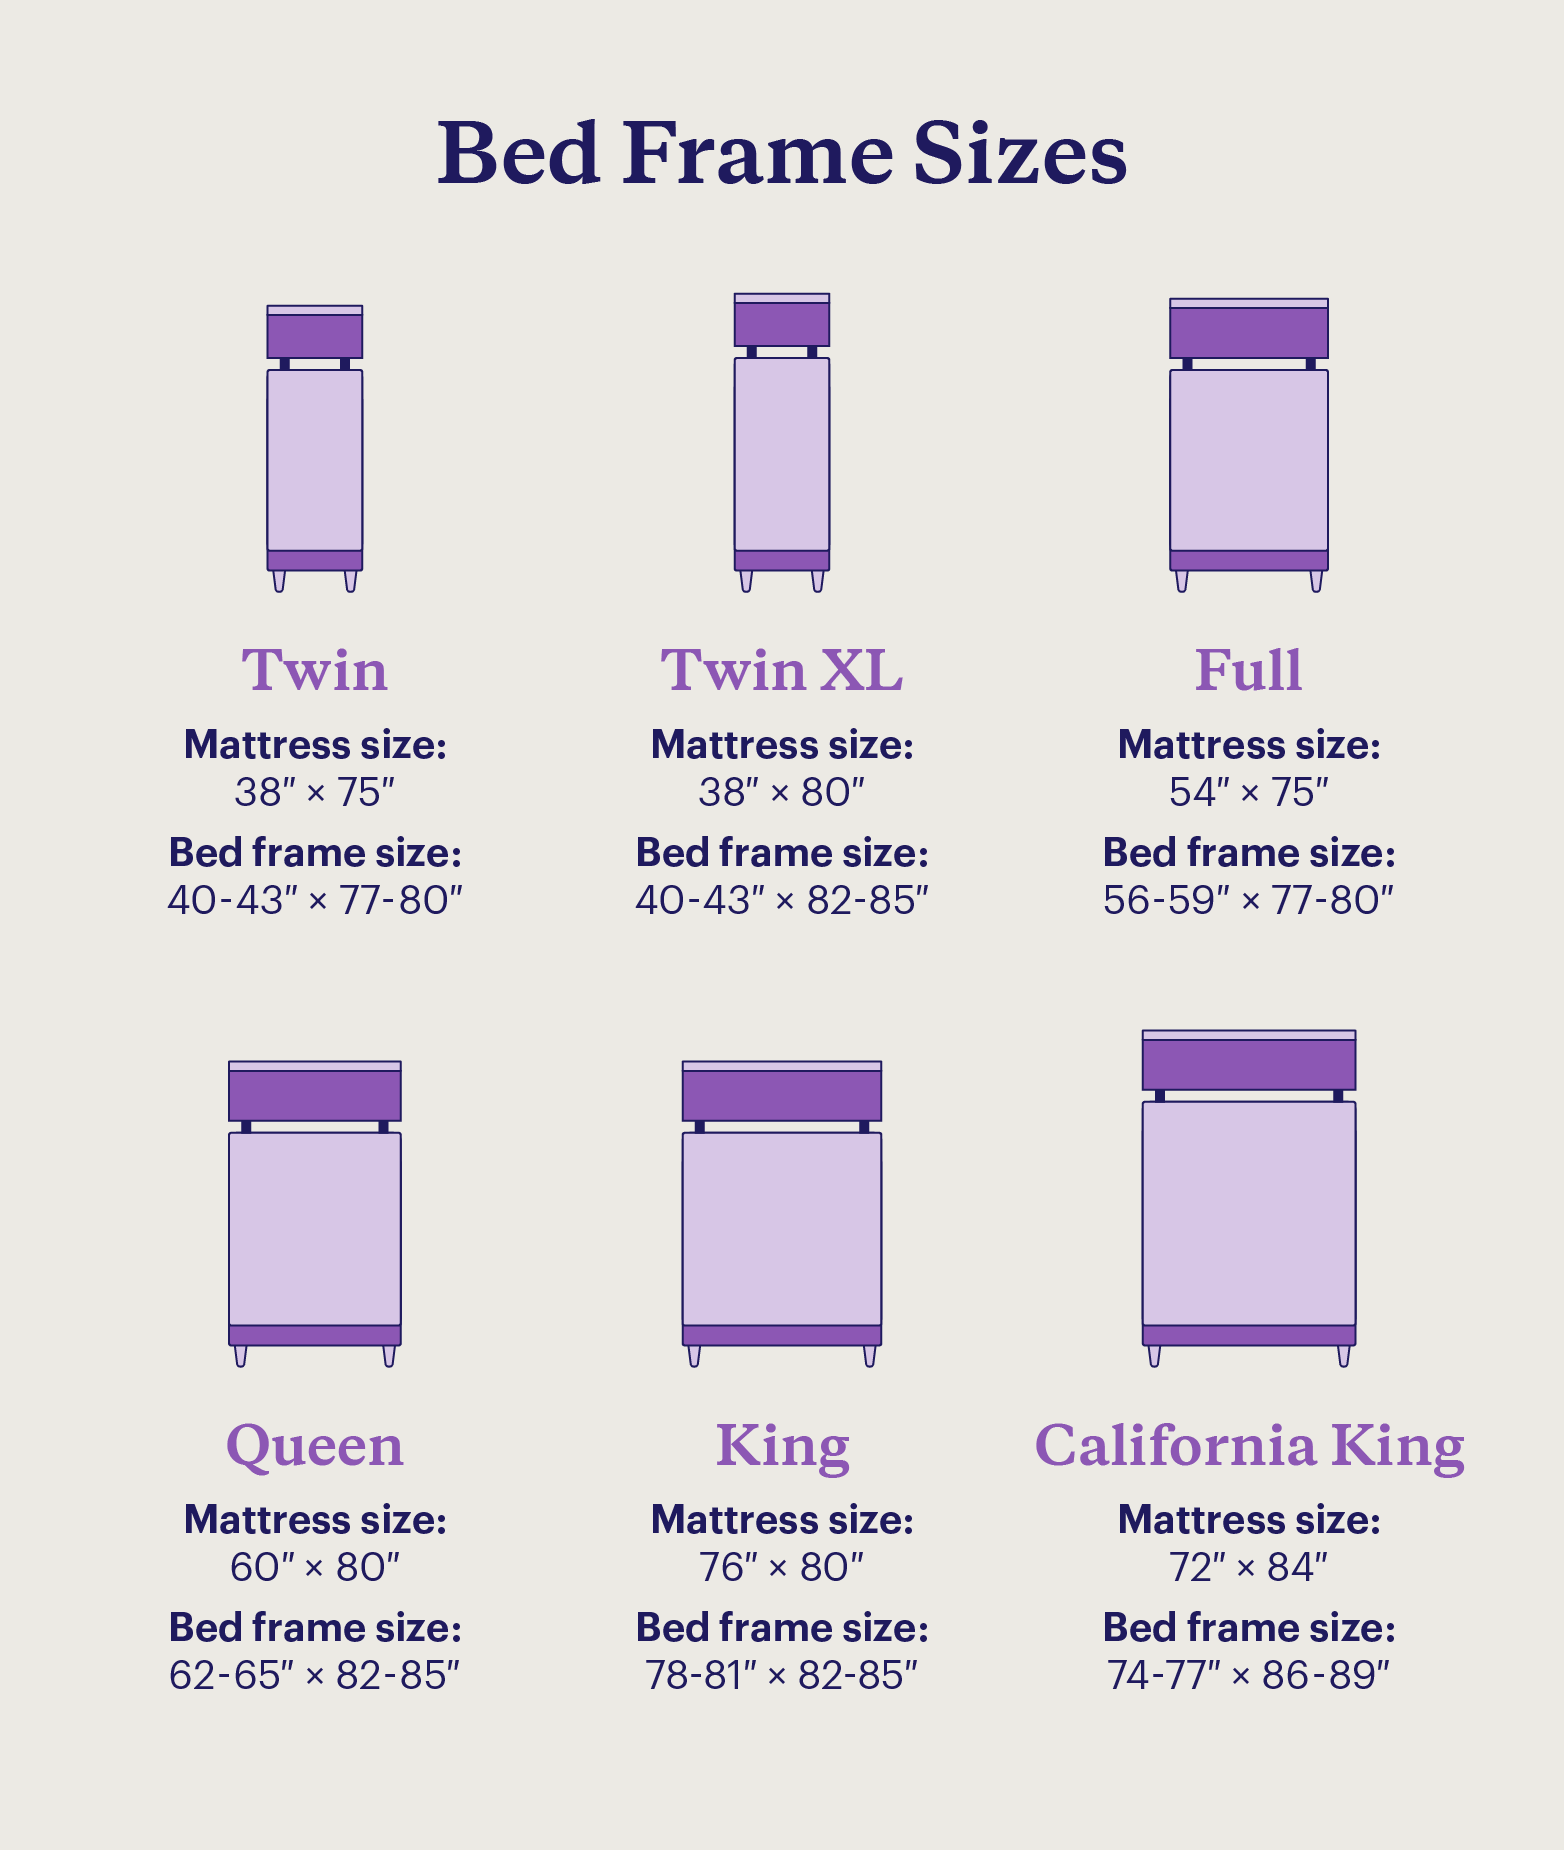 Illustration of the six standard bed frame sizes and their dimensions.